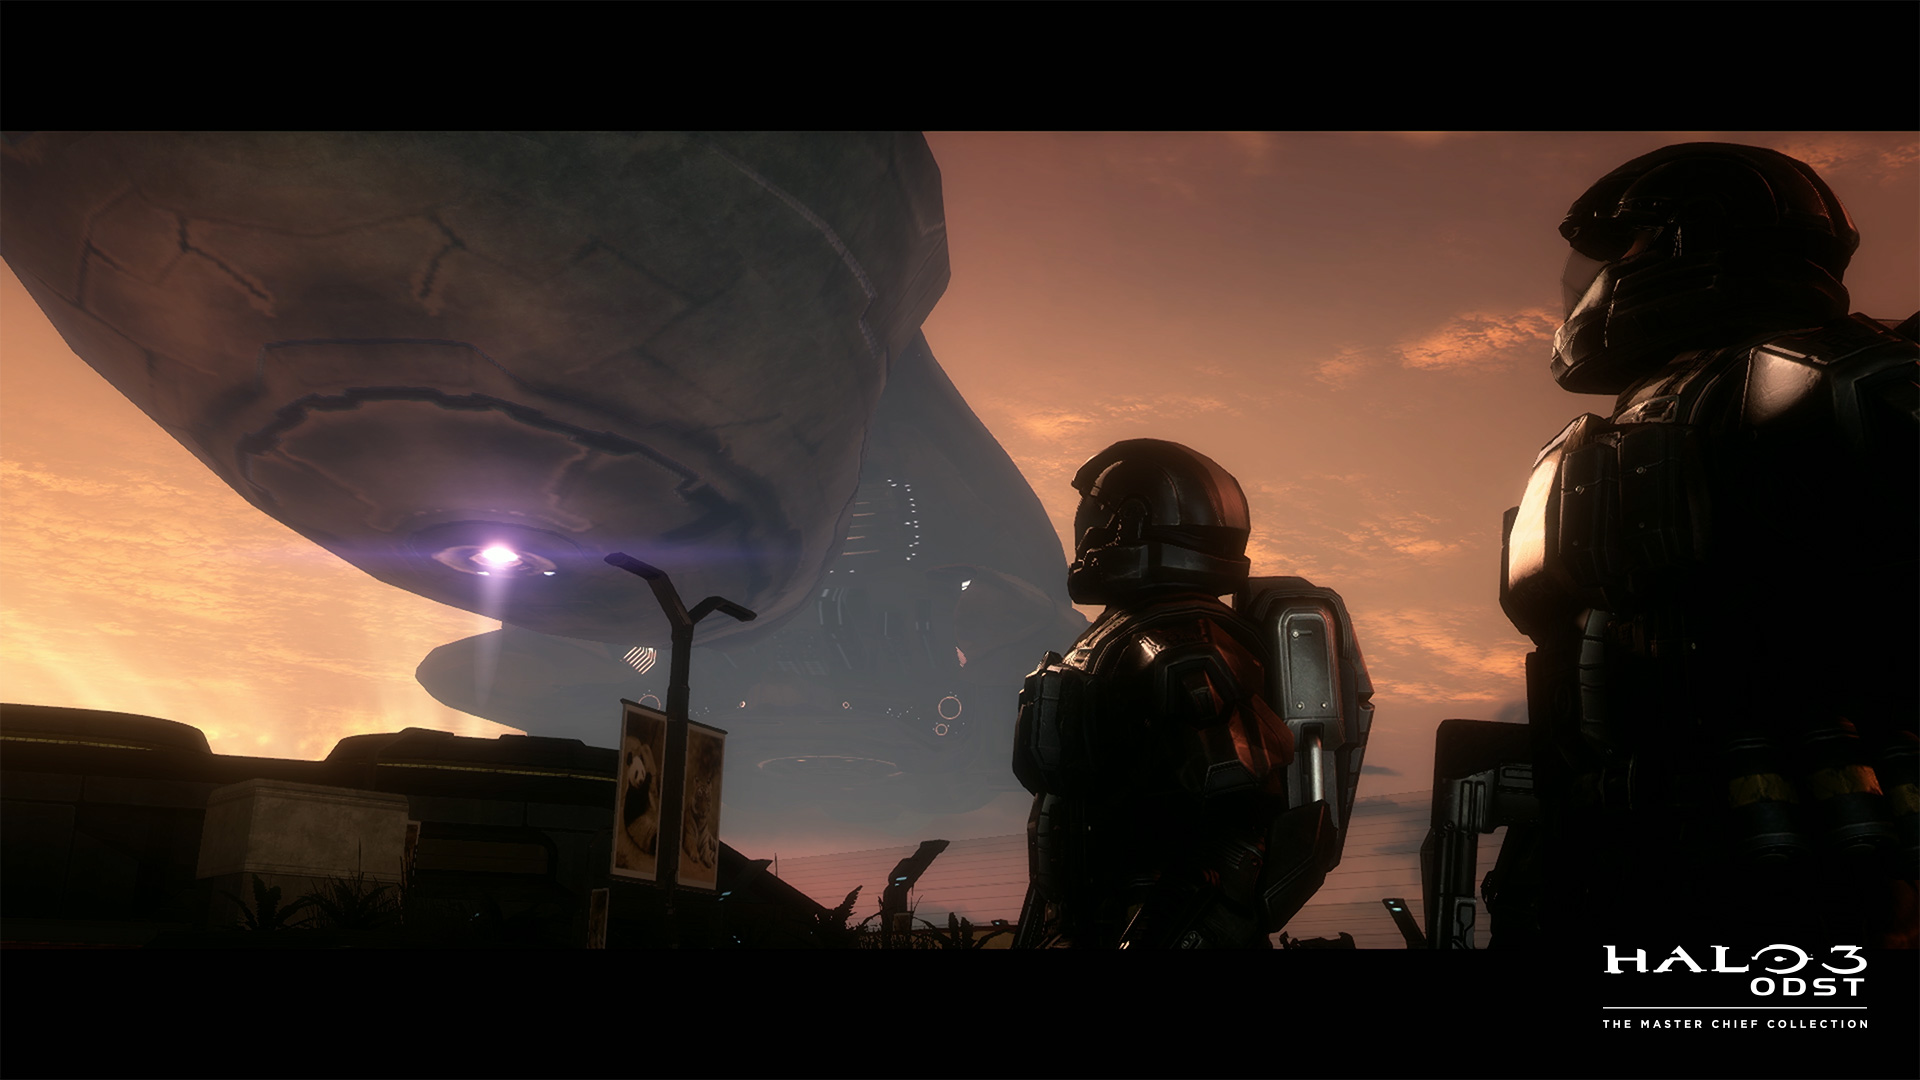 Halo 3: ODST Now Available for PC with The Master Chief Collection